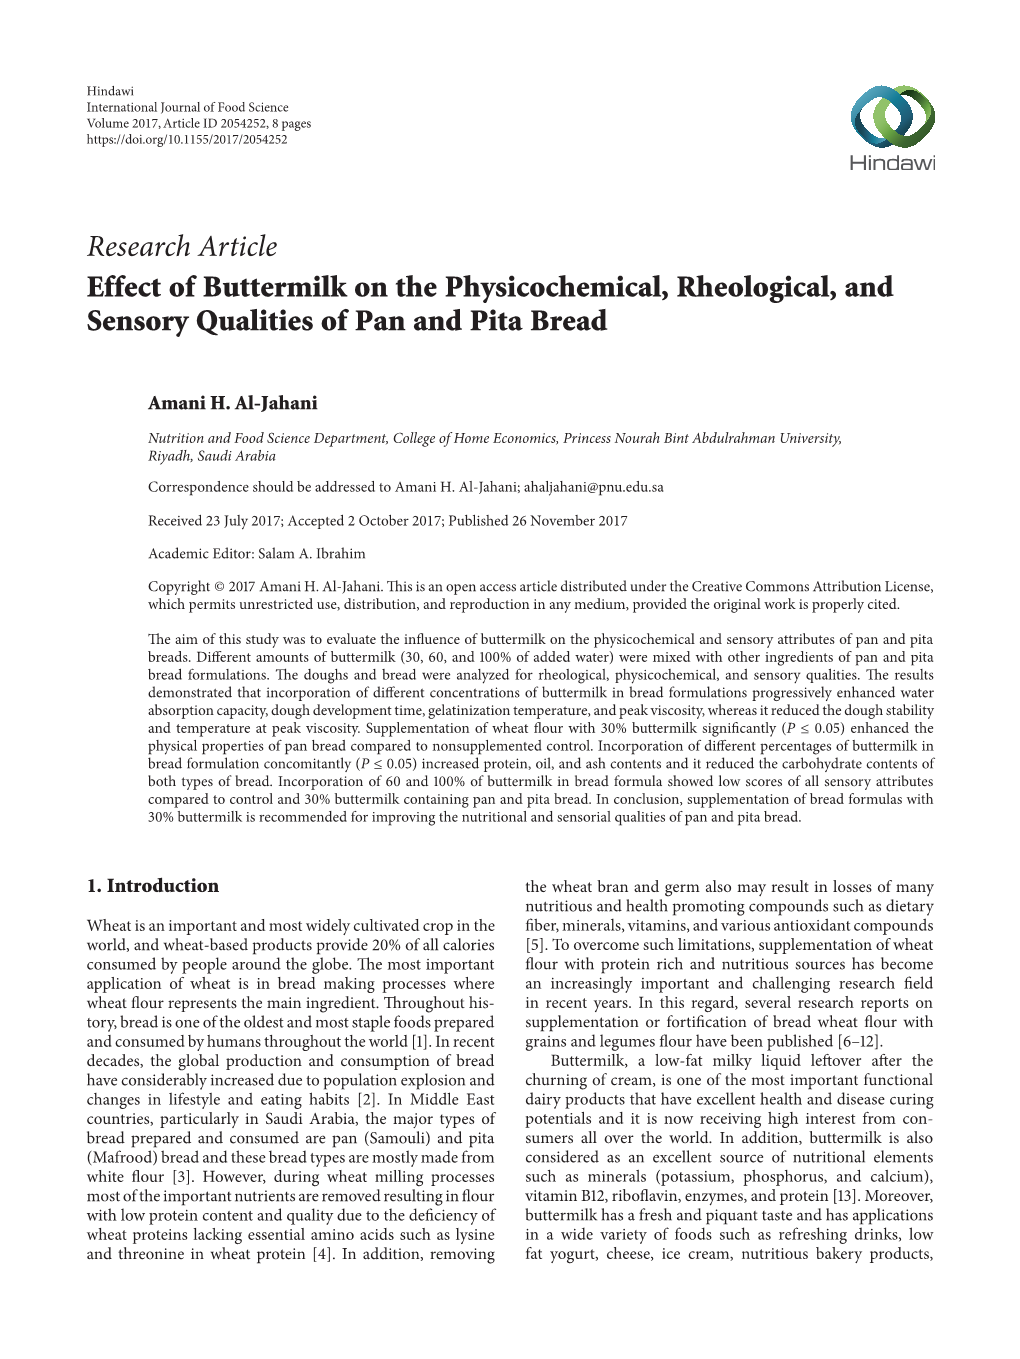 Research Article Effect of Buttermilk on the Physicochemical, Rheological, and Sensory Qualities of Pan and Pita Bread